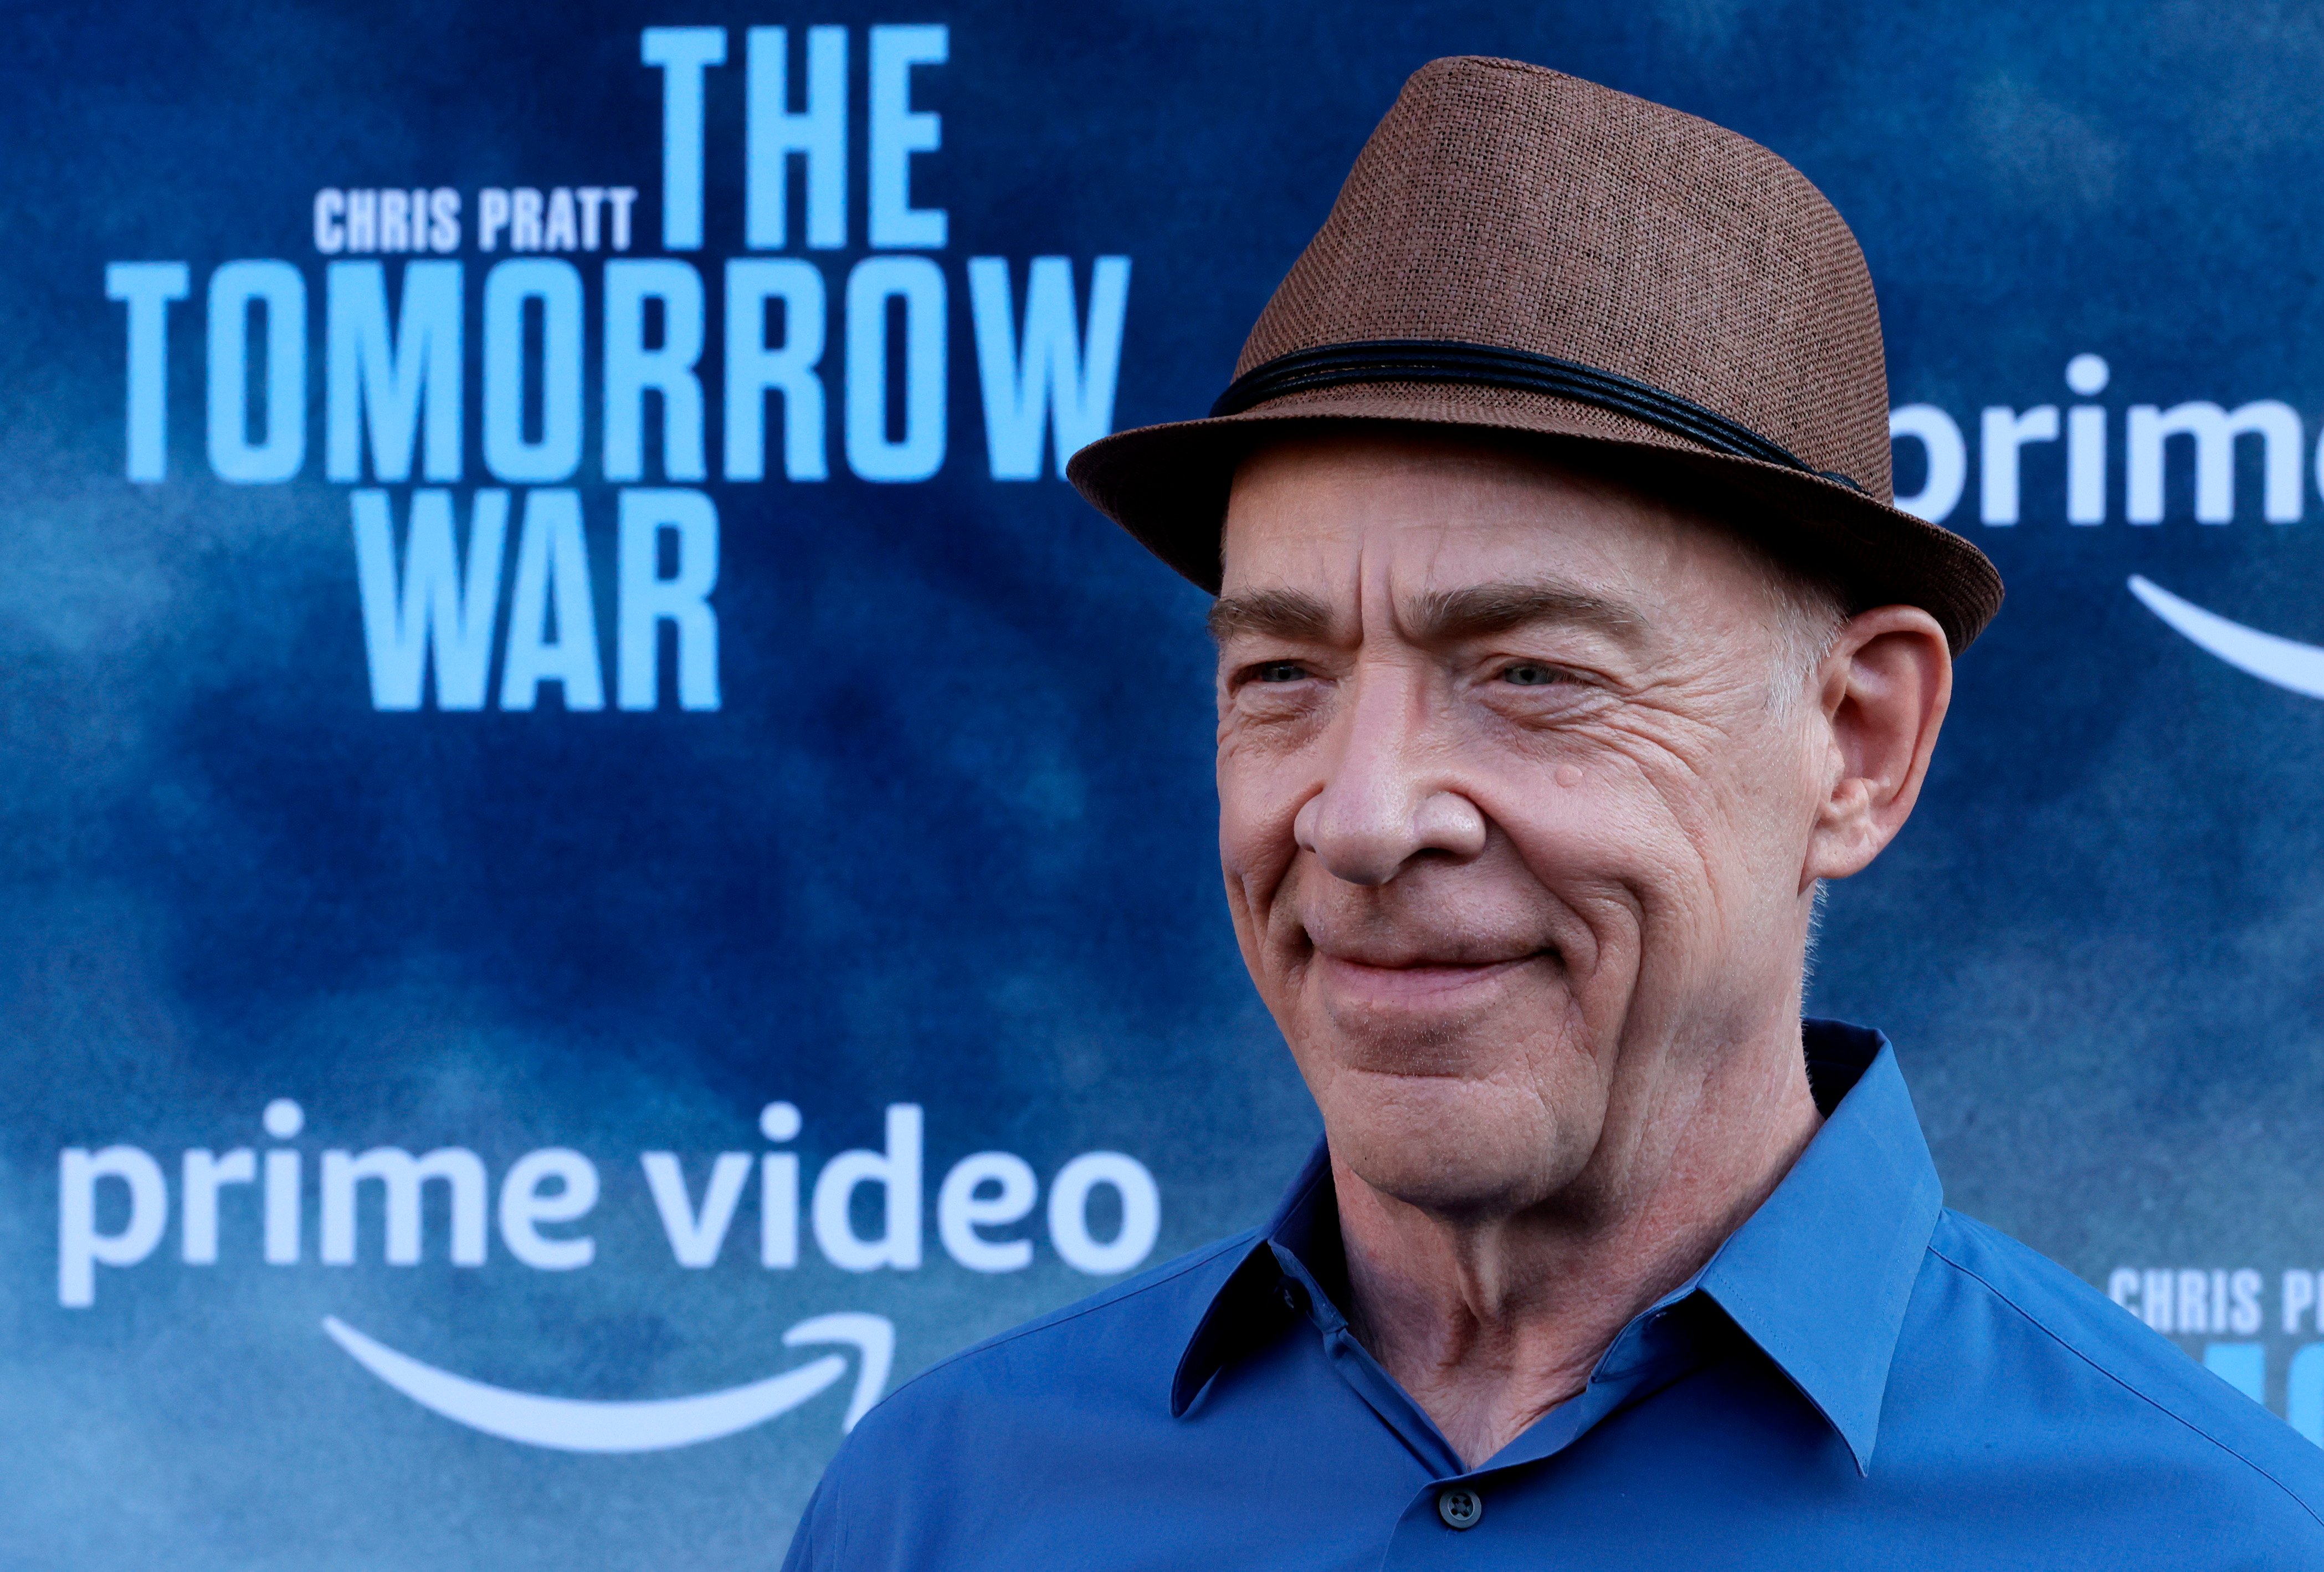 JK Simmons wearing a hat at premiere of 'The Tomorrow War'